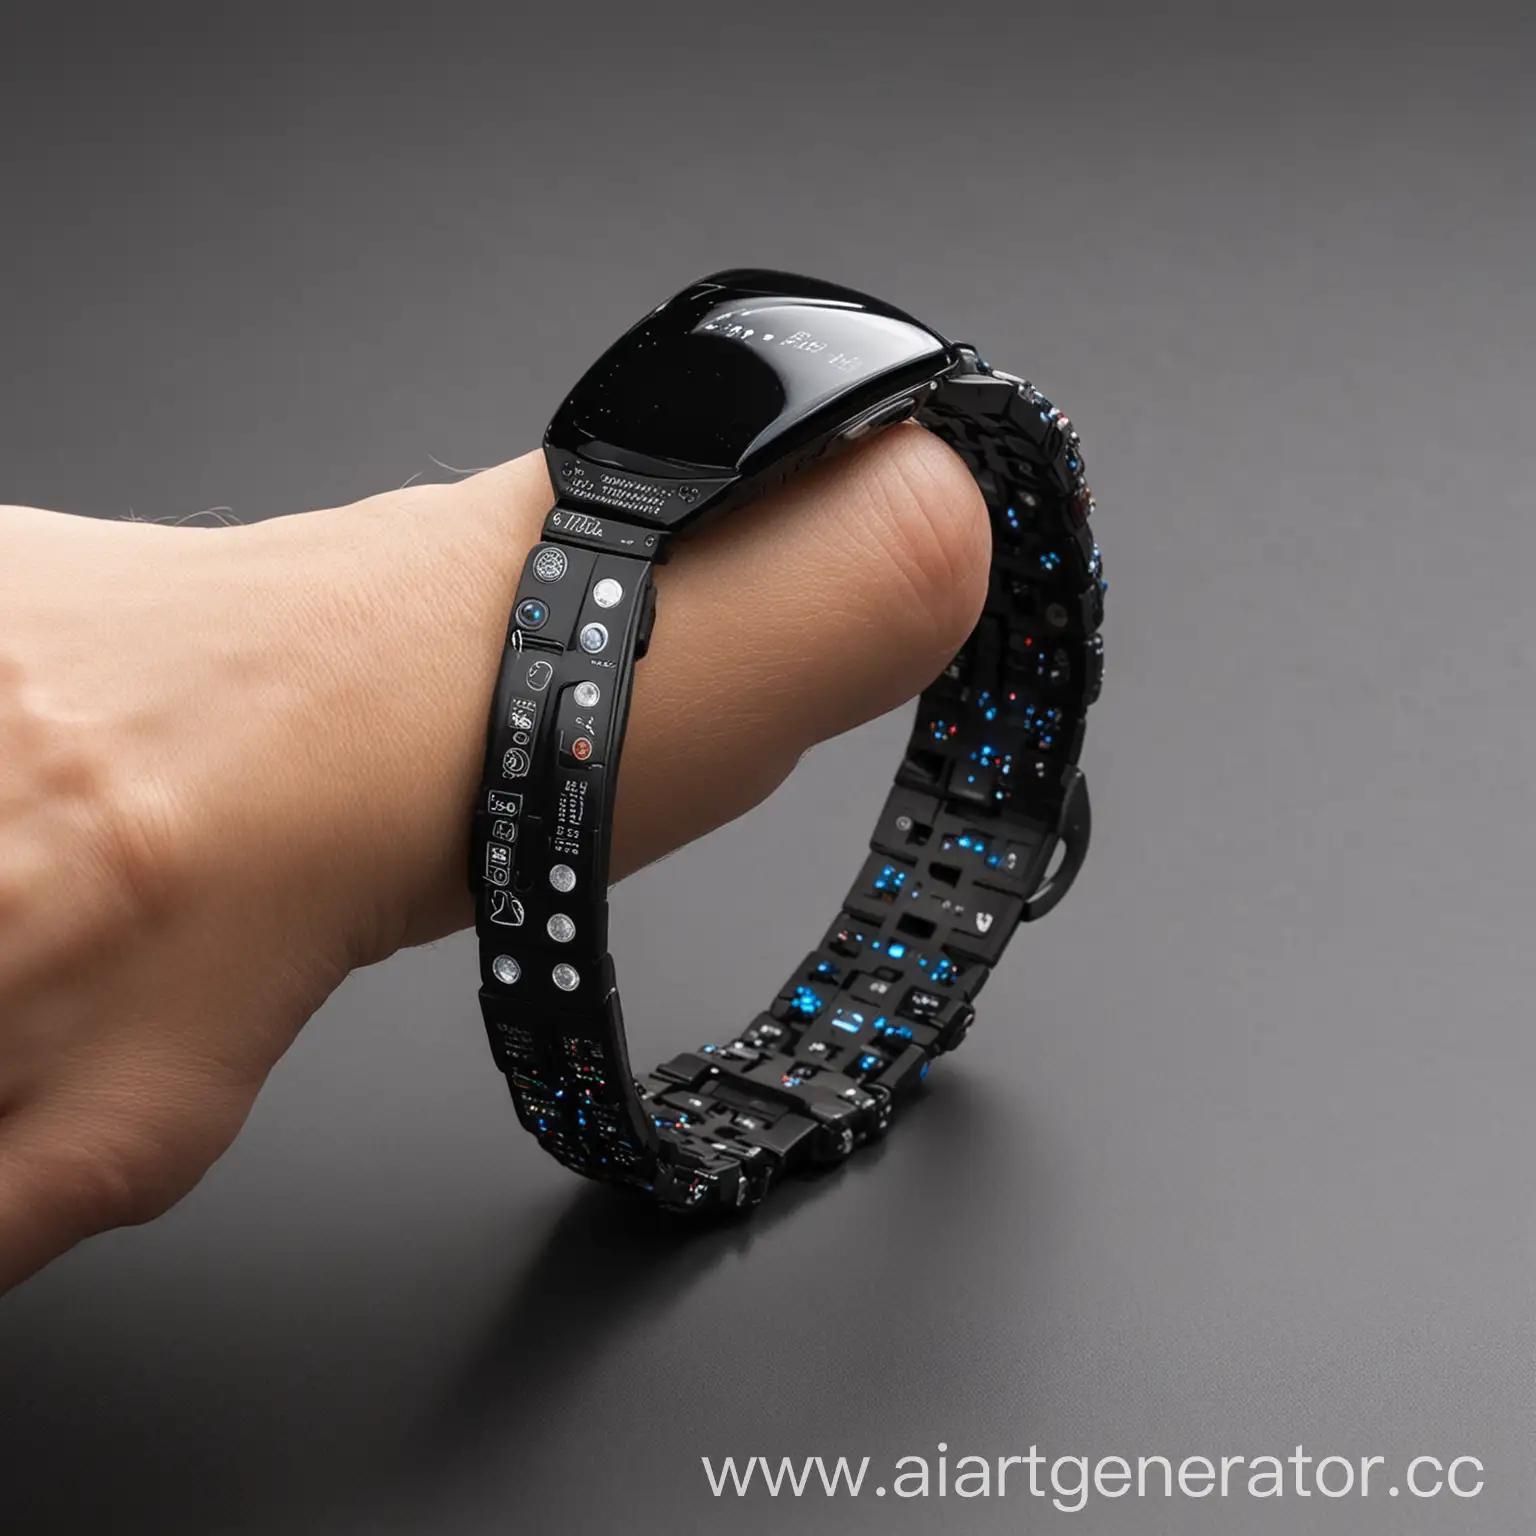 Assistive-Bracelet-for-Visually-Impaired-Spatial-Scanning-Aid